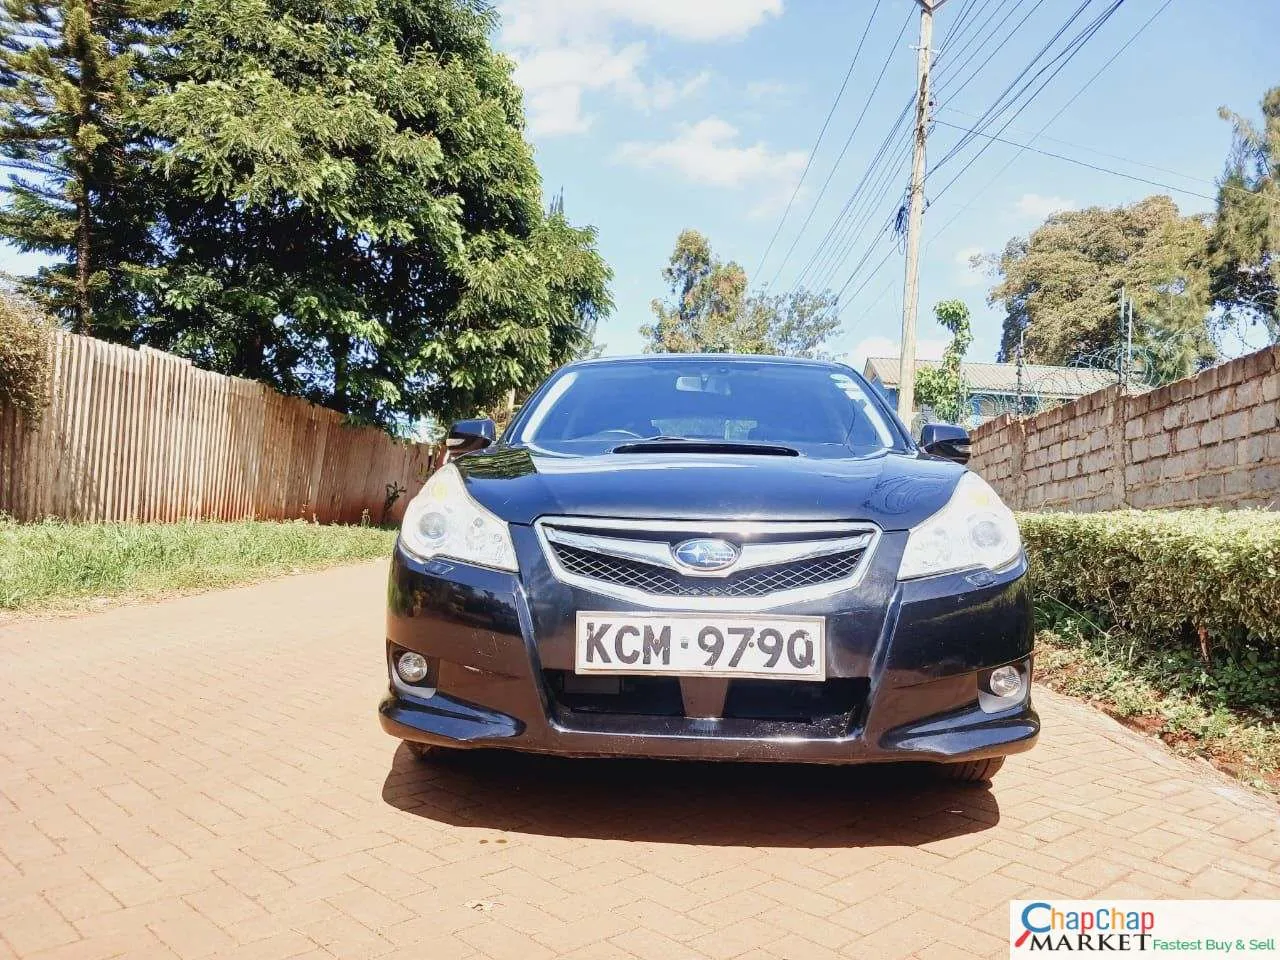 Legacy for sale in kenya you pay 30% DEPOSIT hire purchase installments EXCLUSIVE Subaru legacy